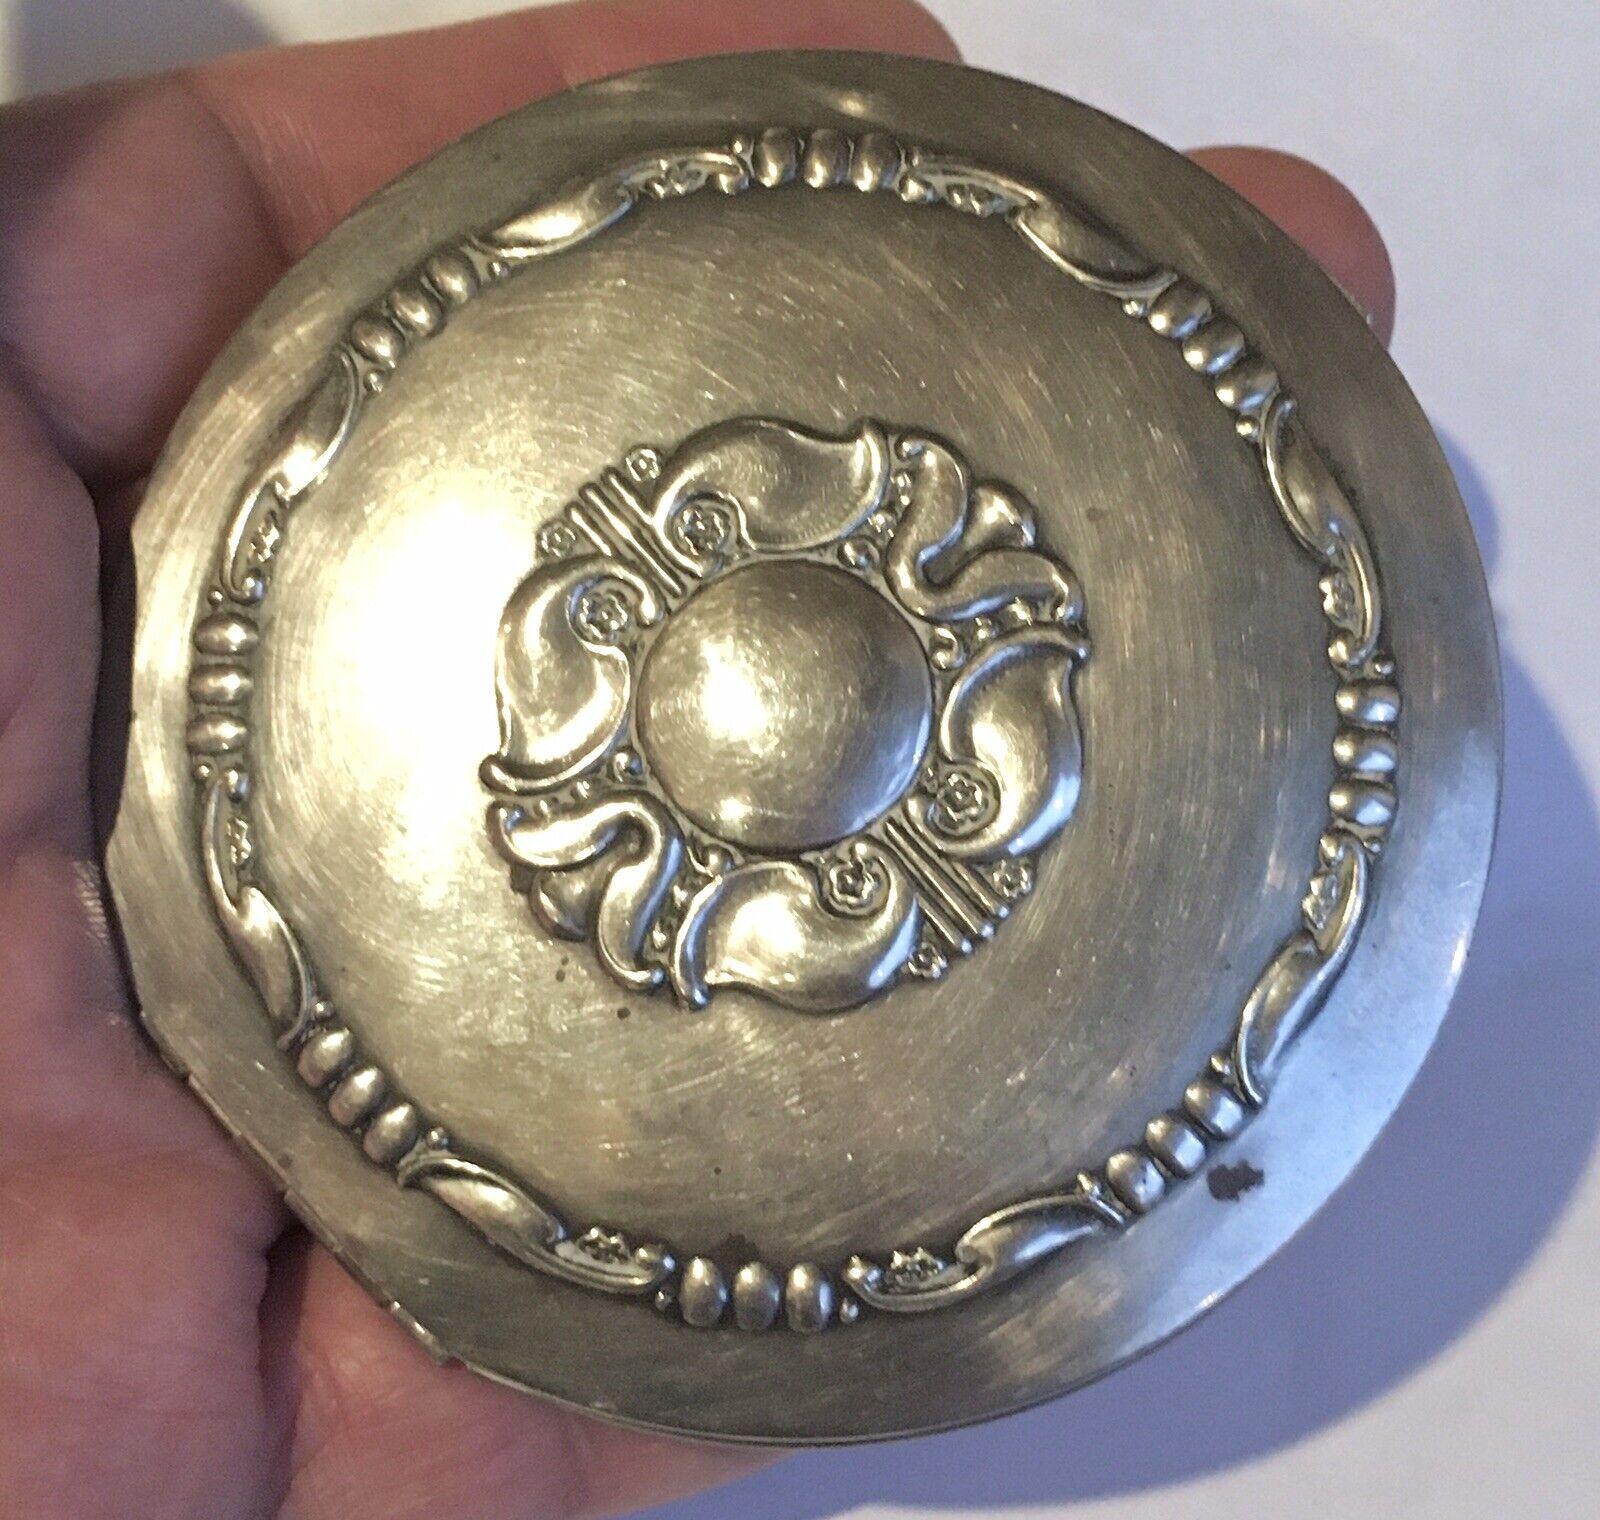 Vintage Sterling Silver Powder Compact by Birks 
In an excellent conditions hallmarked Birks
Birks Group traces its origins to the opening by Henry Birks of a small jewellery shop in Montreal in 1879 ... 

weight 77.1 gram